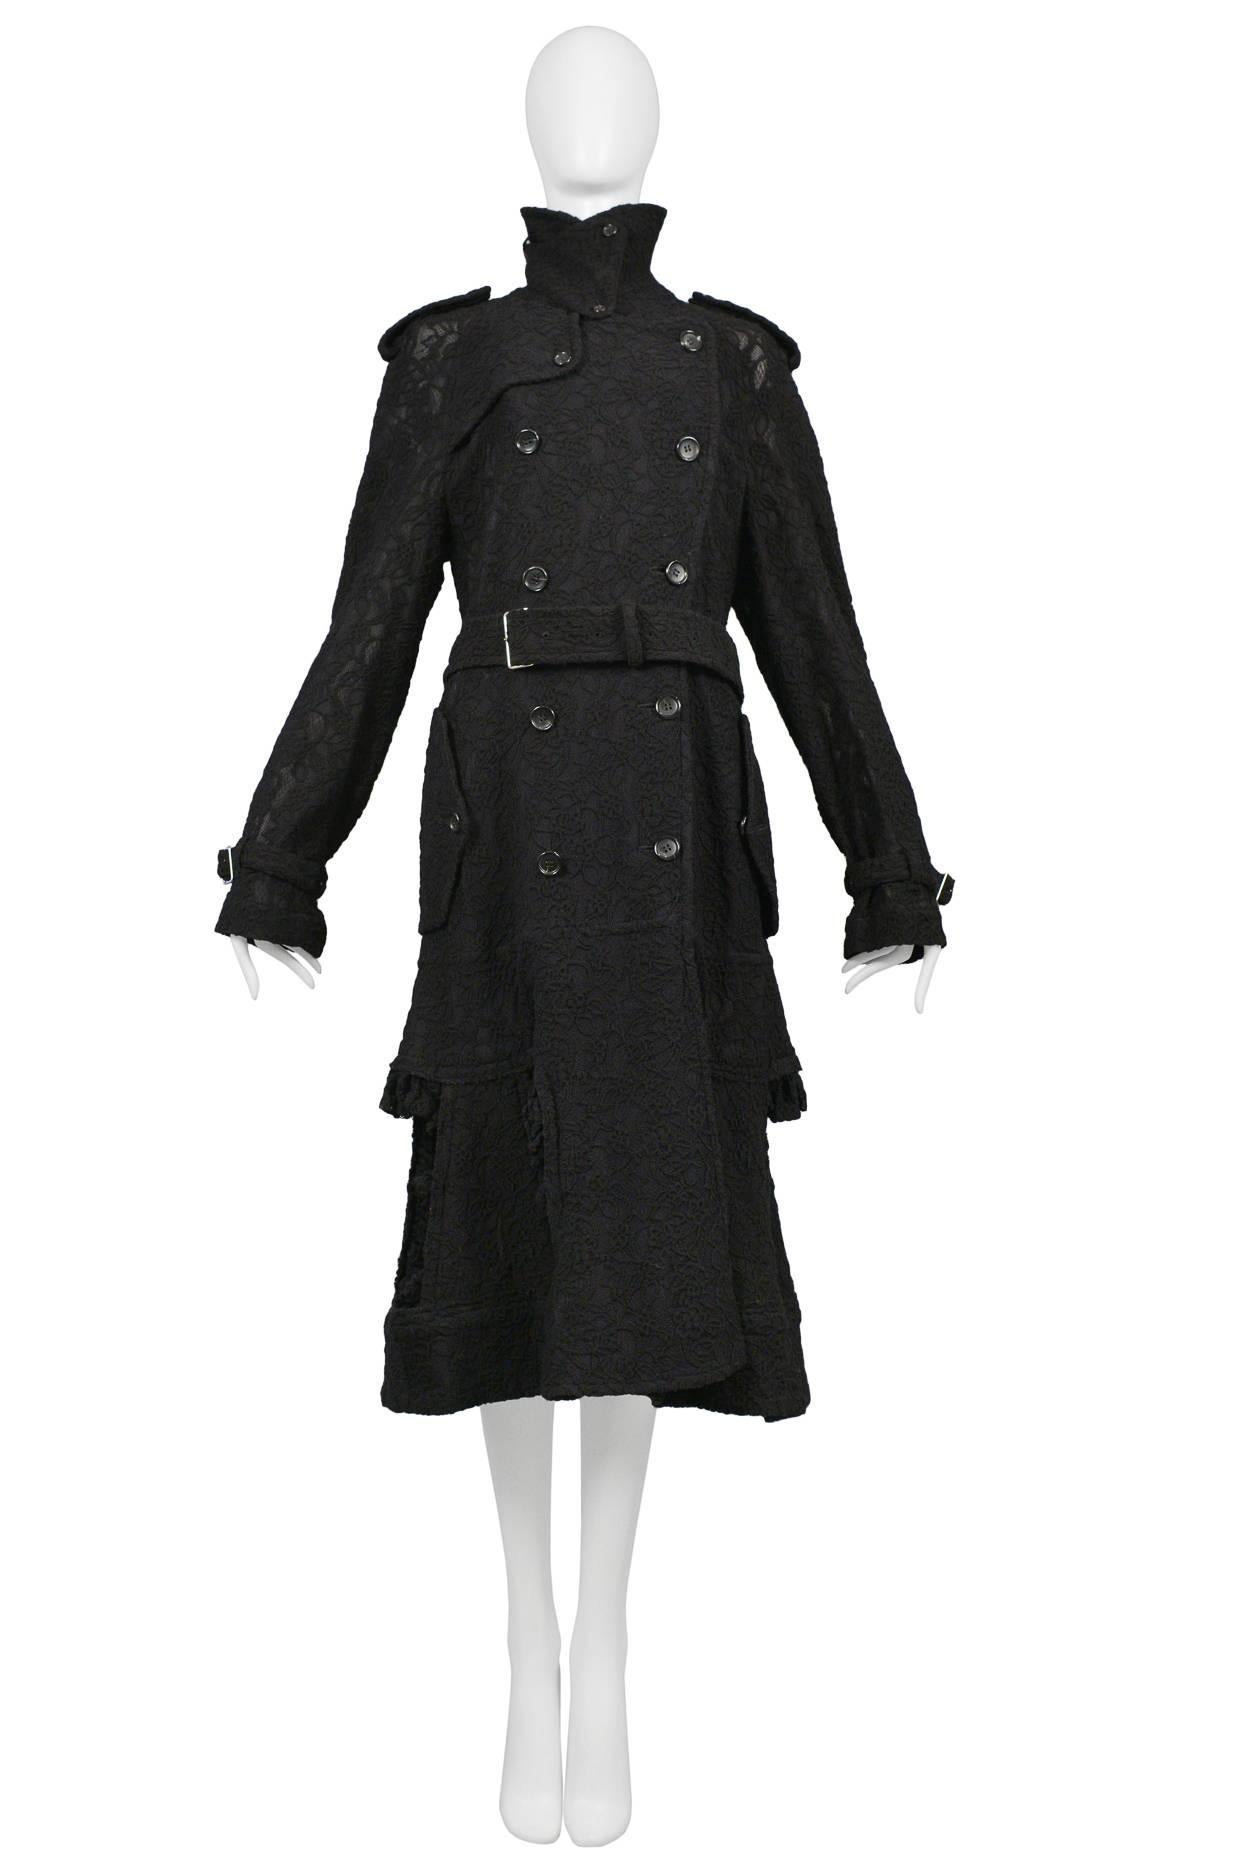 Comme des Garcons black embroidered trench coat. Collection 2015.